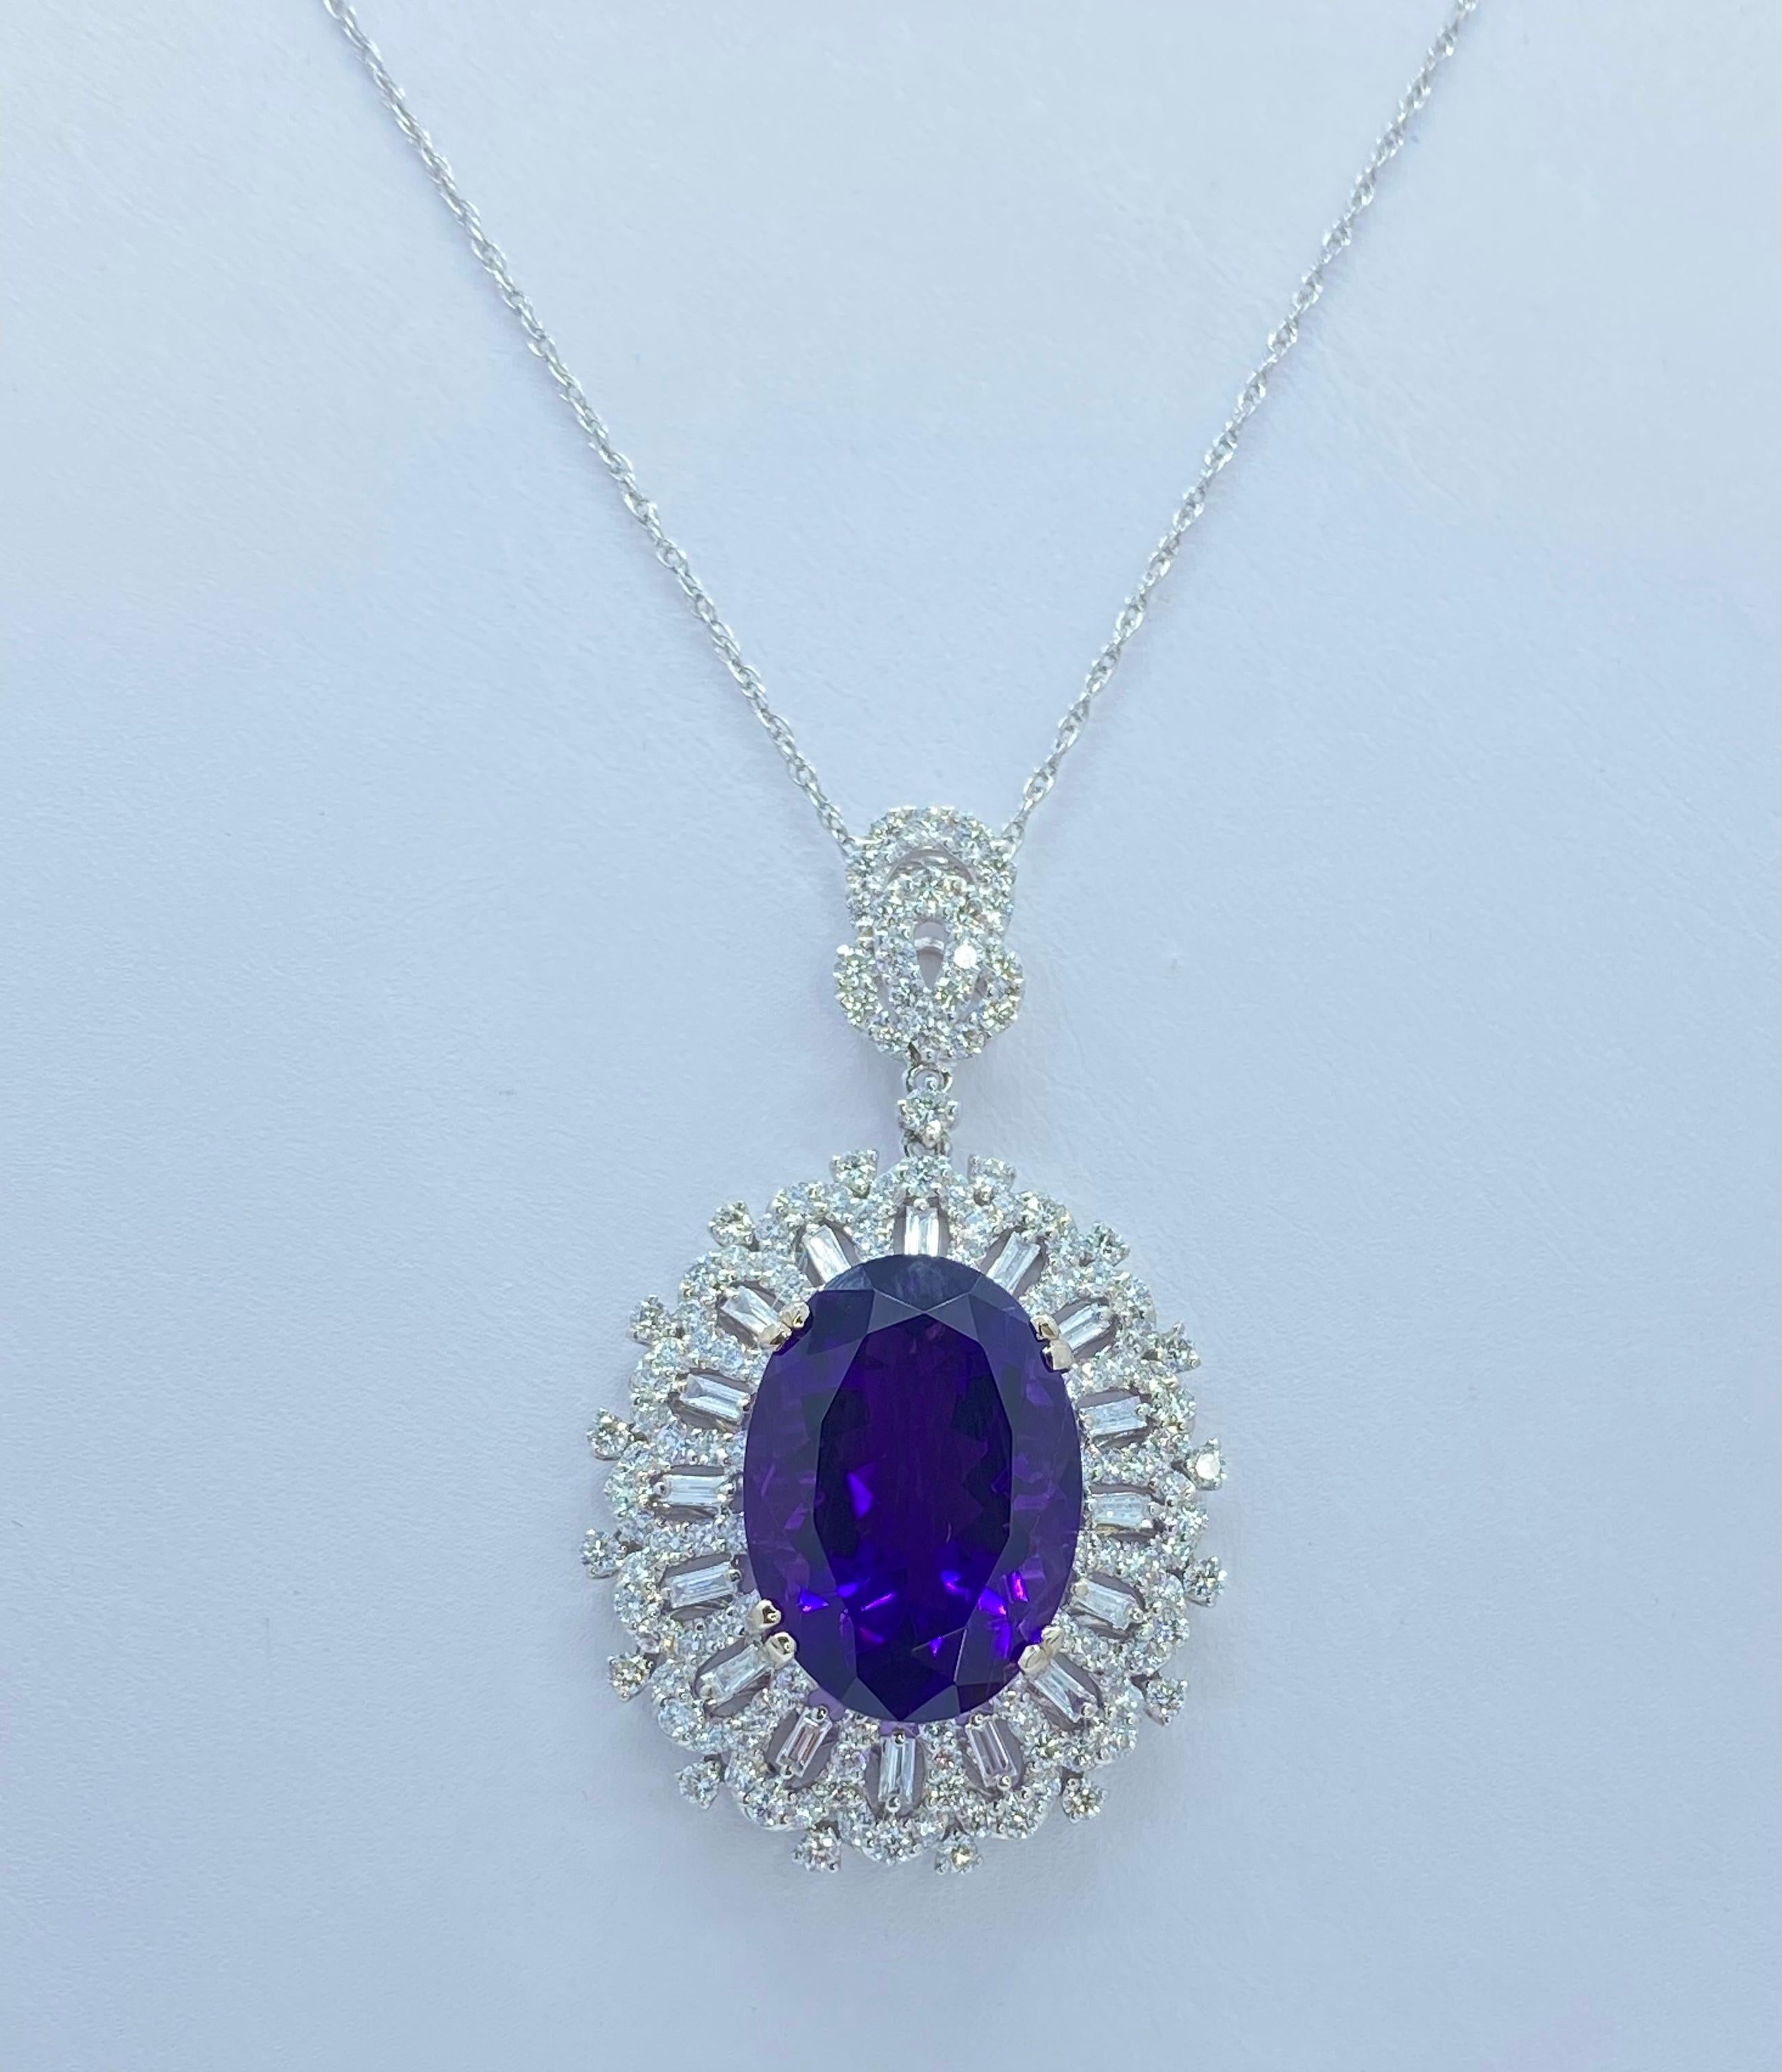 Very regal 18 karat white gold diamond and amethyst pendant has a combined approximate total weight of 17 carats. It is comprised of approximately 150 round brilliant cut and baguette shaped diamonds.  The oval shaped flower design features a